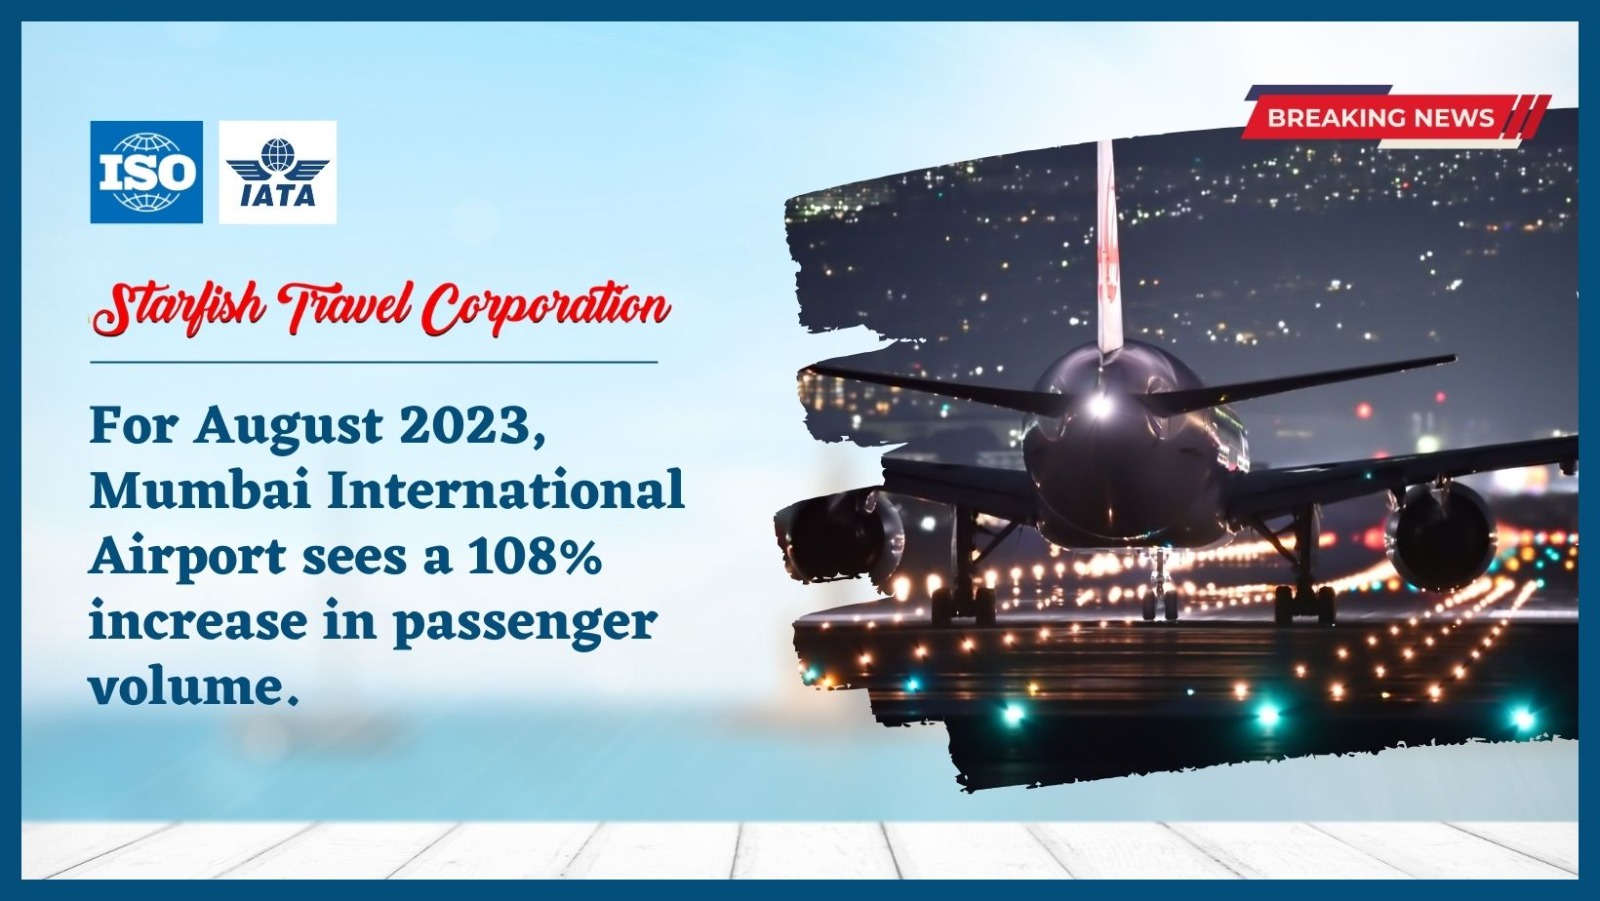 For August 2023, Mumbai International Airport sees a 108% increase in passenger volume.